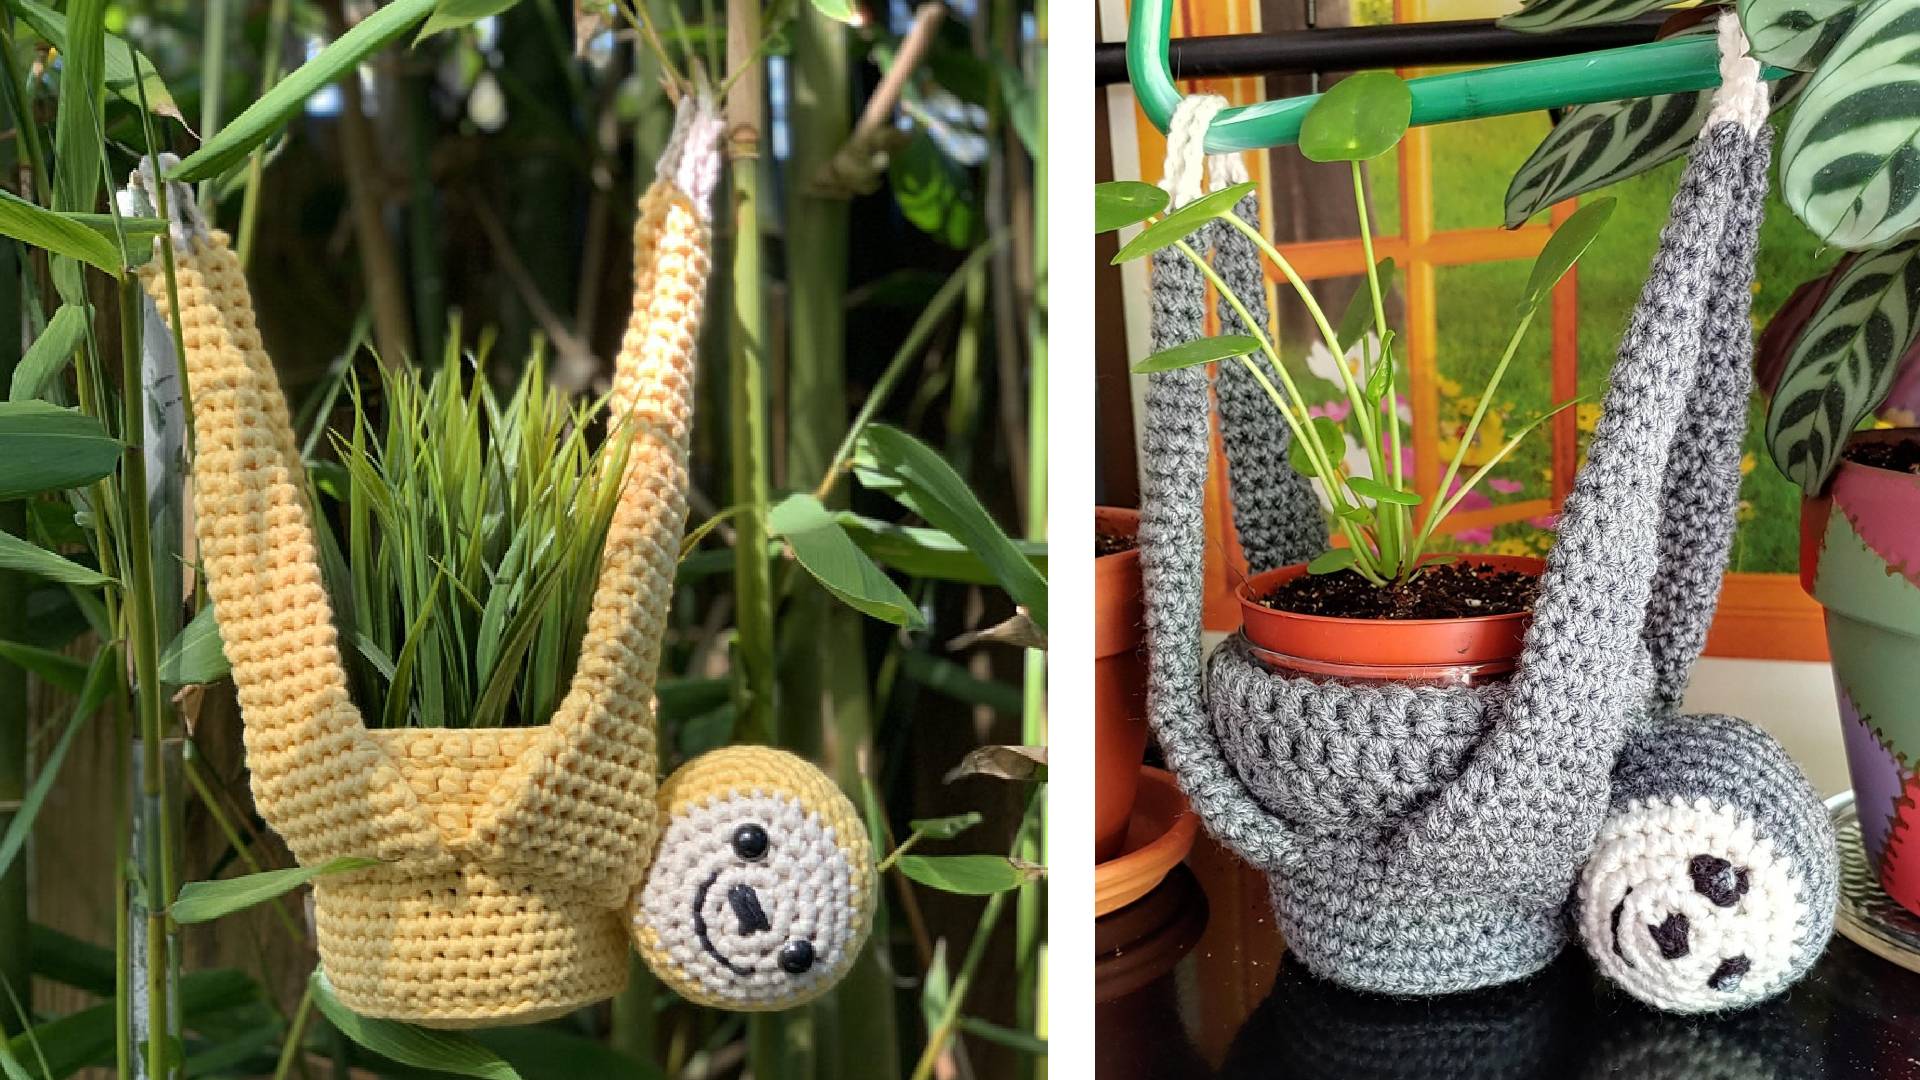 Make Your Own Crochet Sloth Plant Holder With This Pattern!